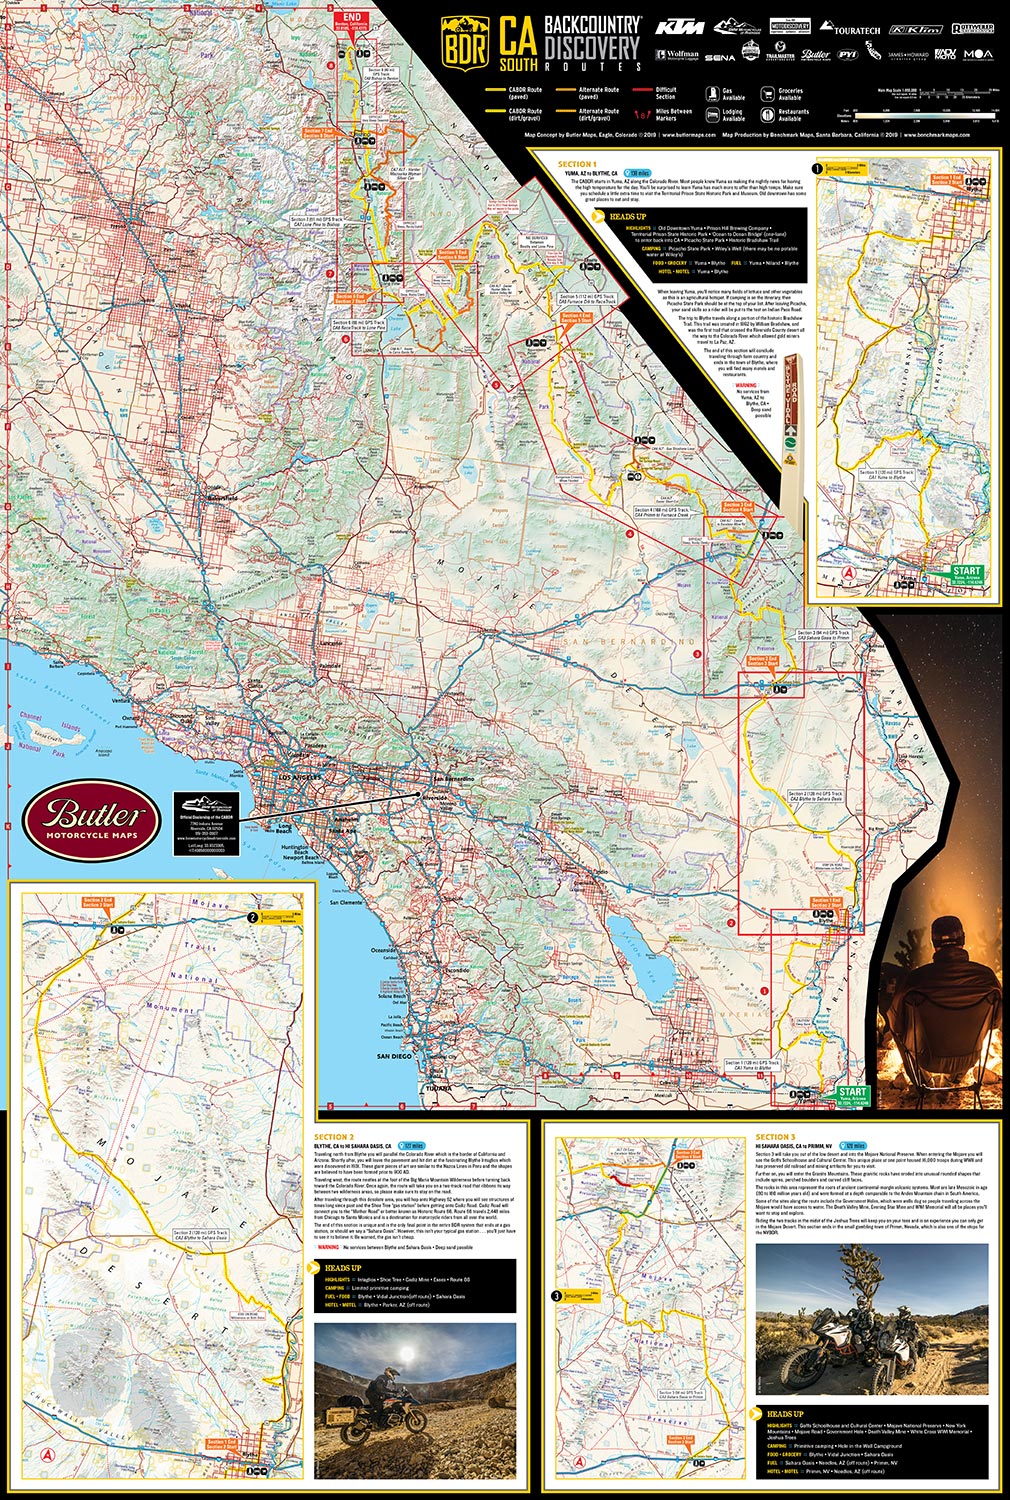 cabdr-south-map-front-web